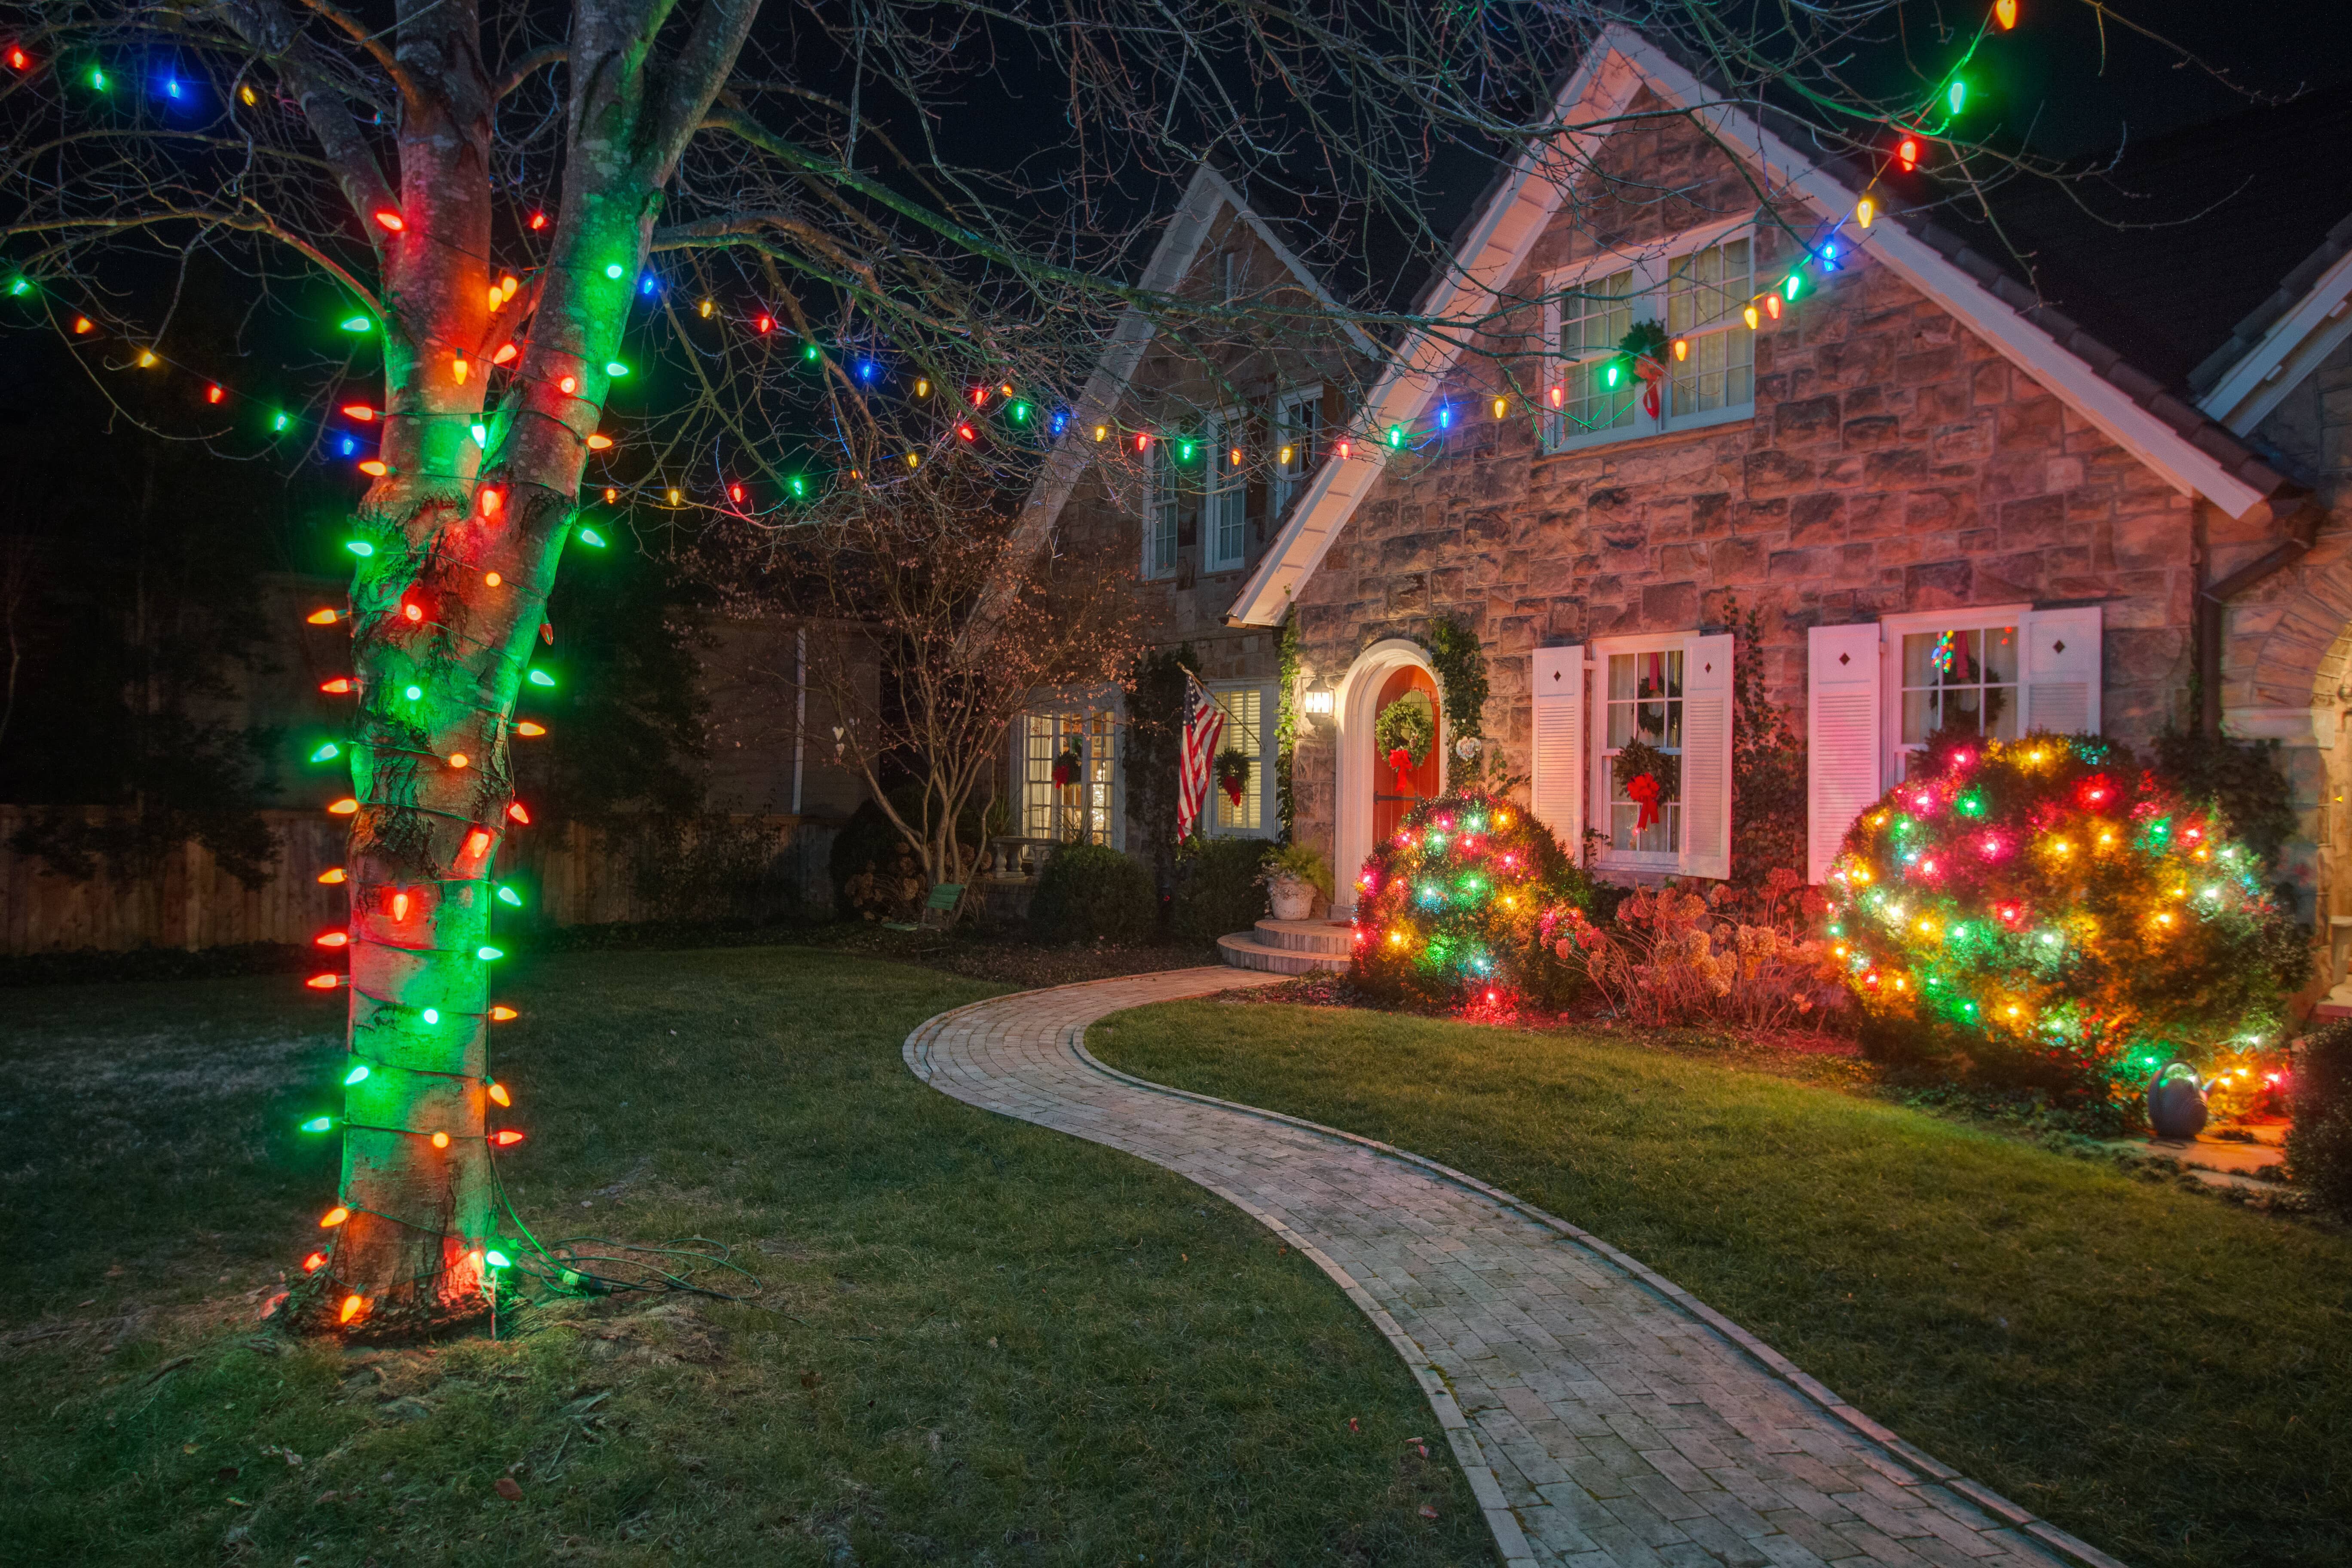 Colorful house with exterior holiday lighting